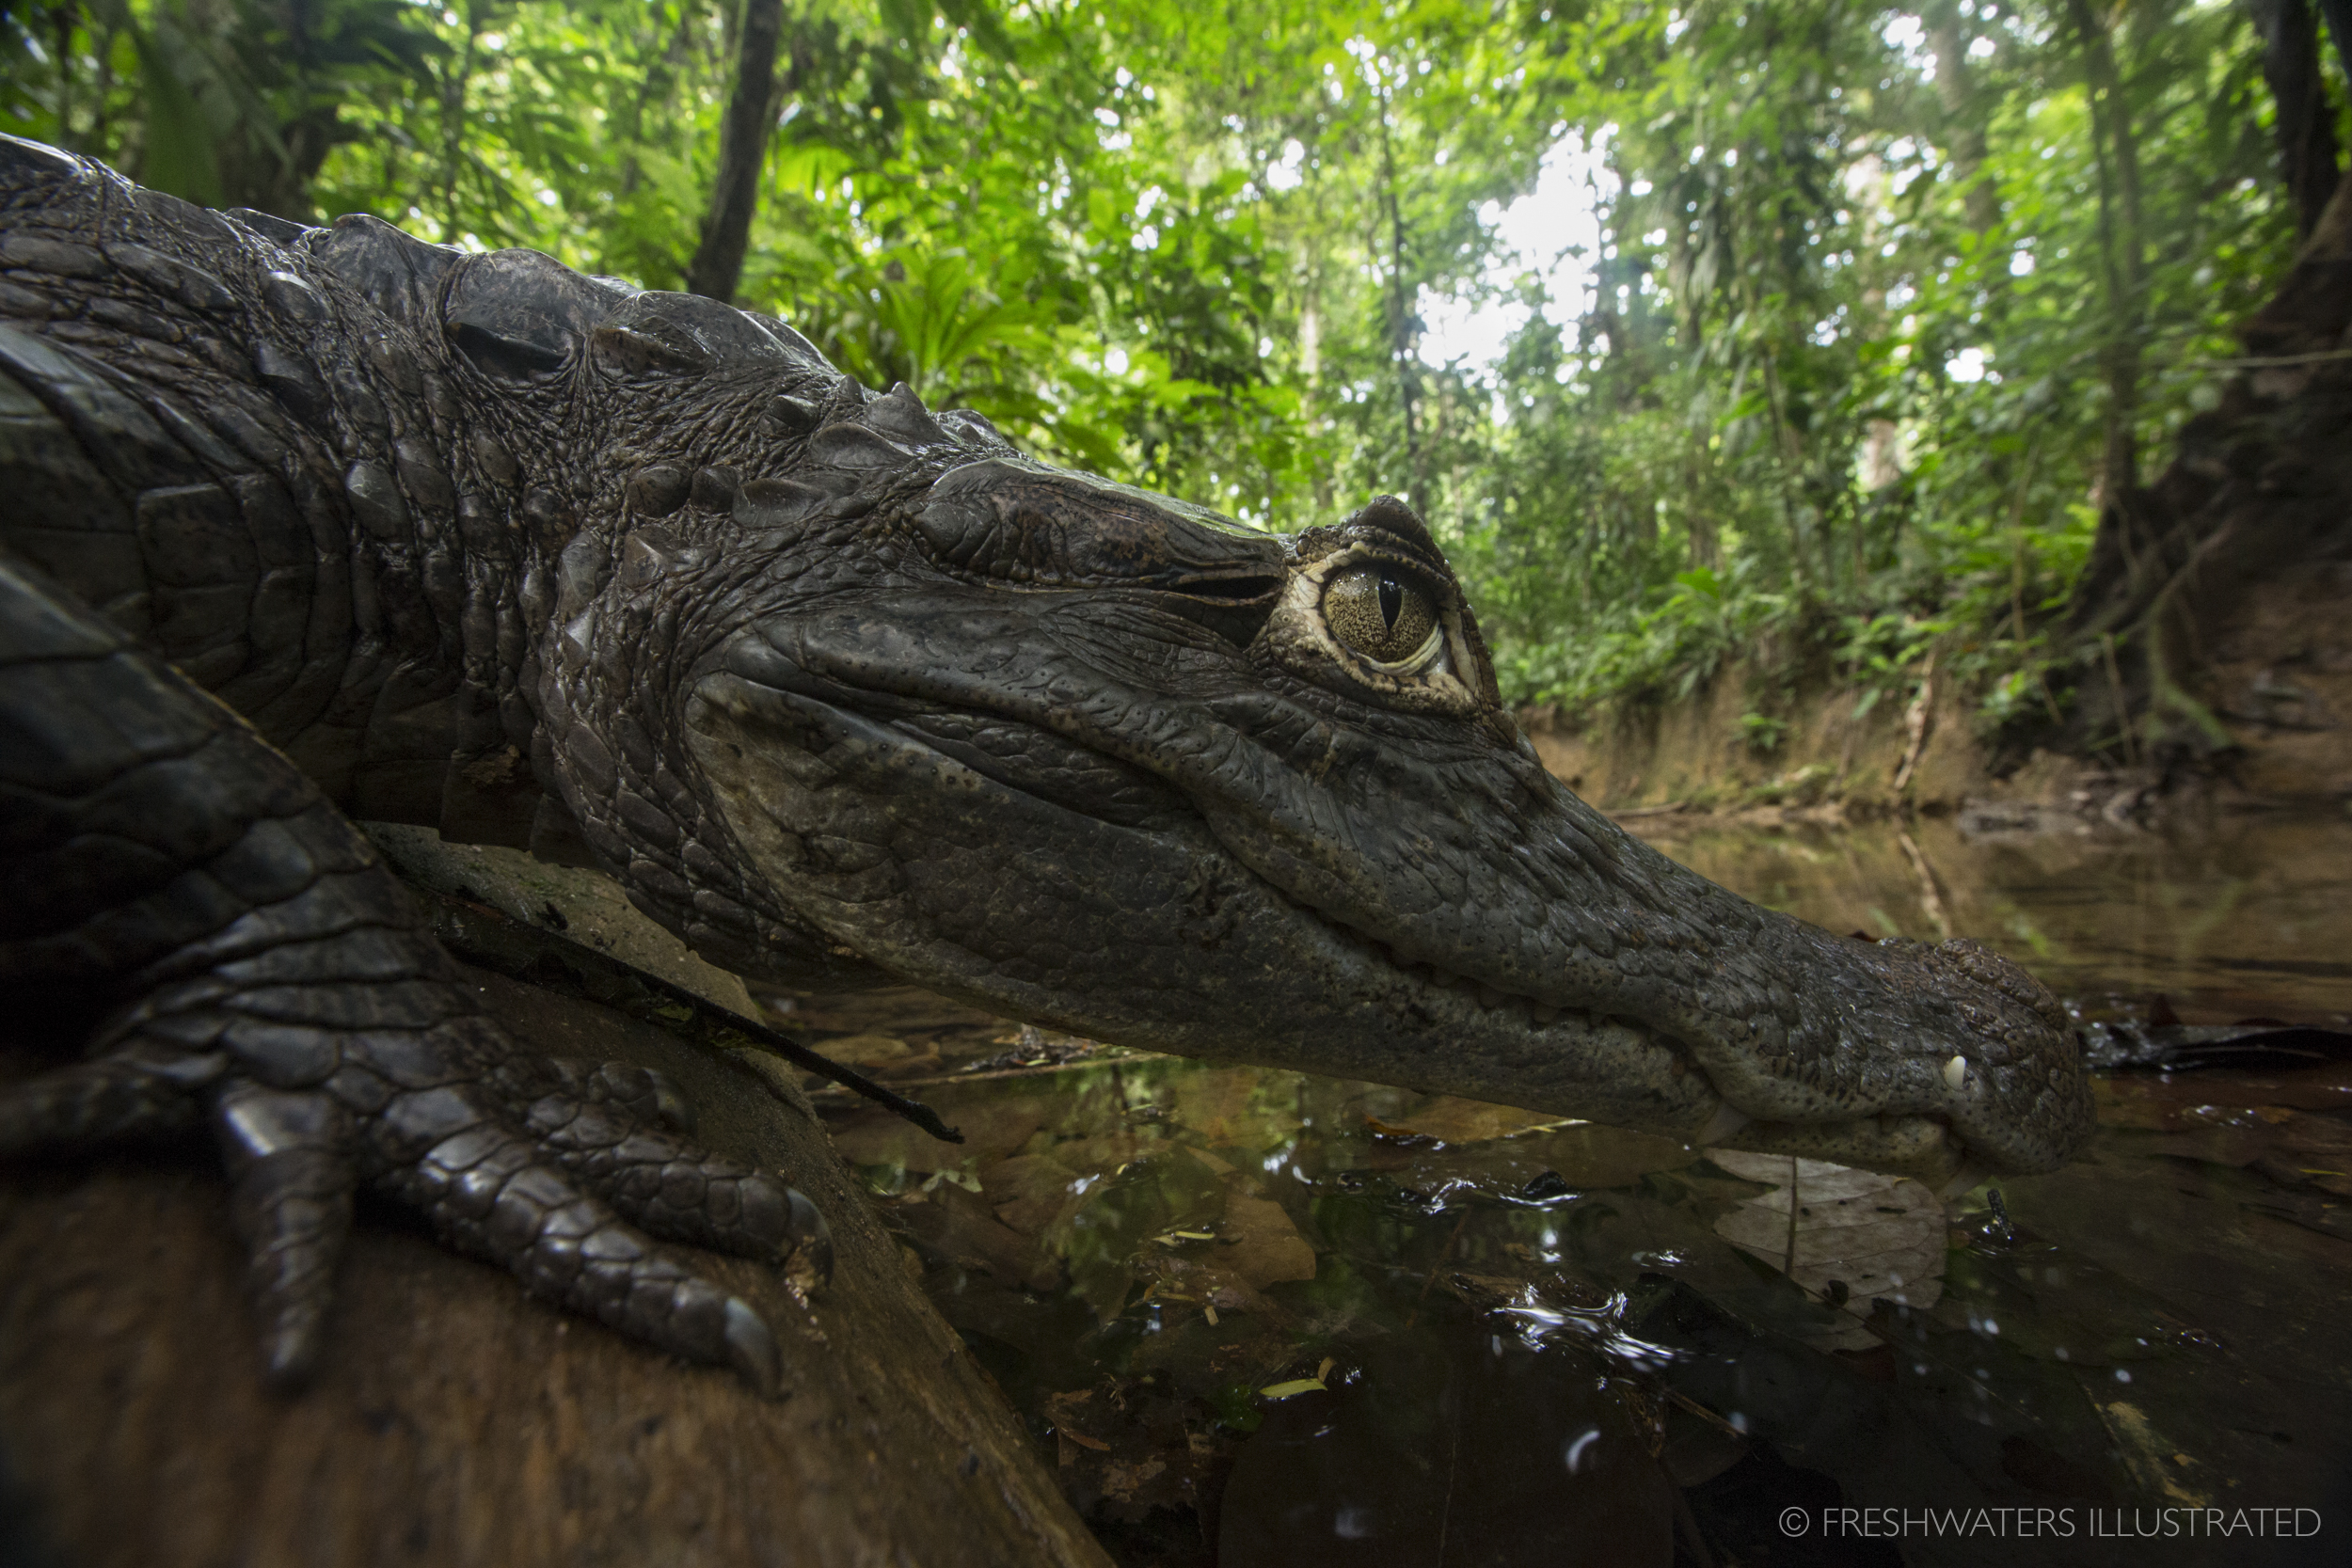  Spectacled caiman (Caiman crocodilus) resting on the bank Creek Azul, Costa Rica 